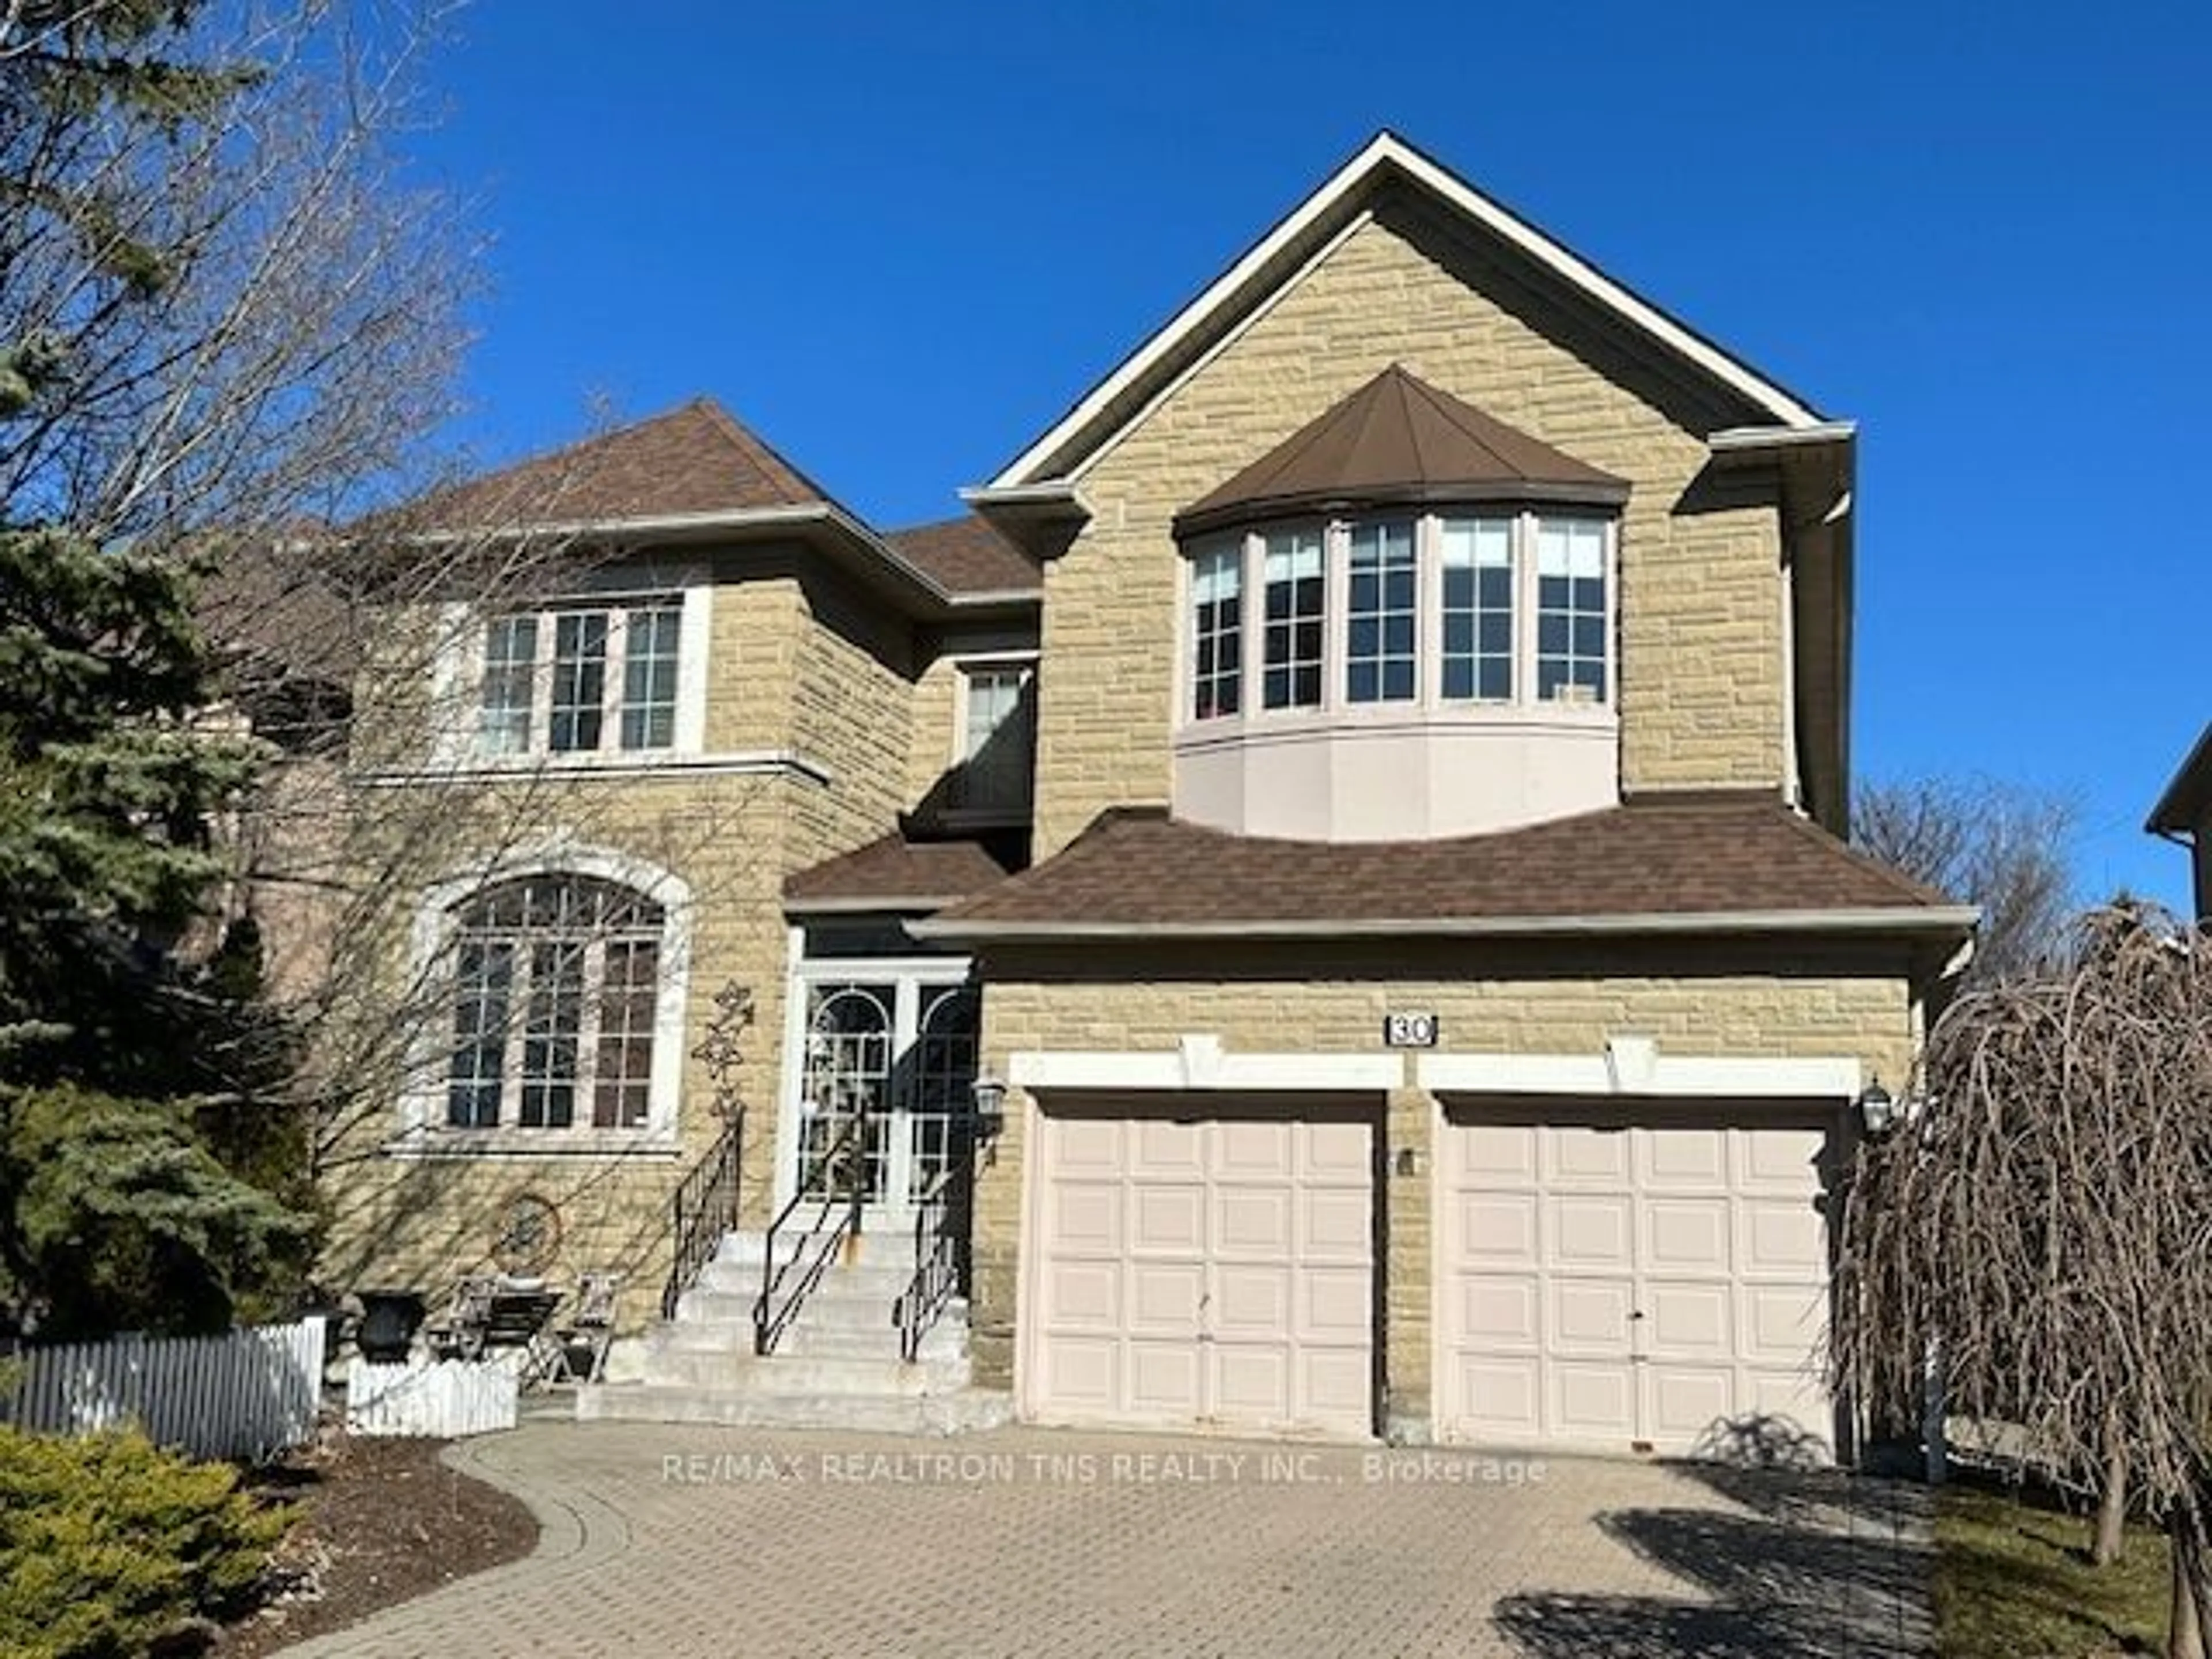 Home with brick exterior material for 30 Edenbrook Cres, Richmond Hill Ontario L4B 4B5